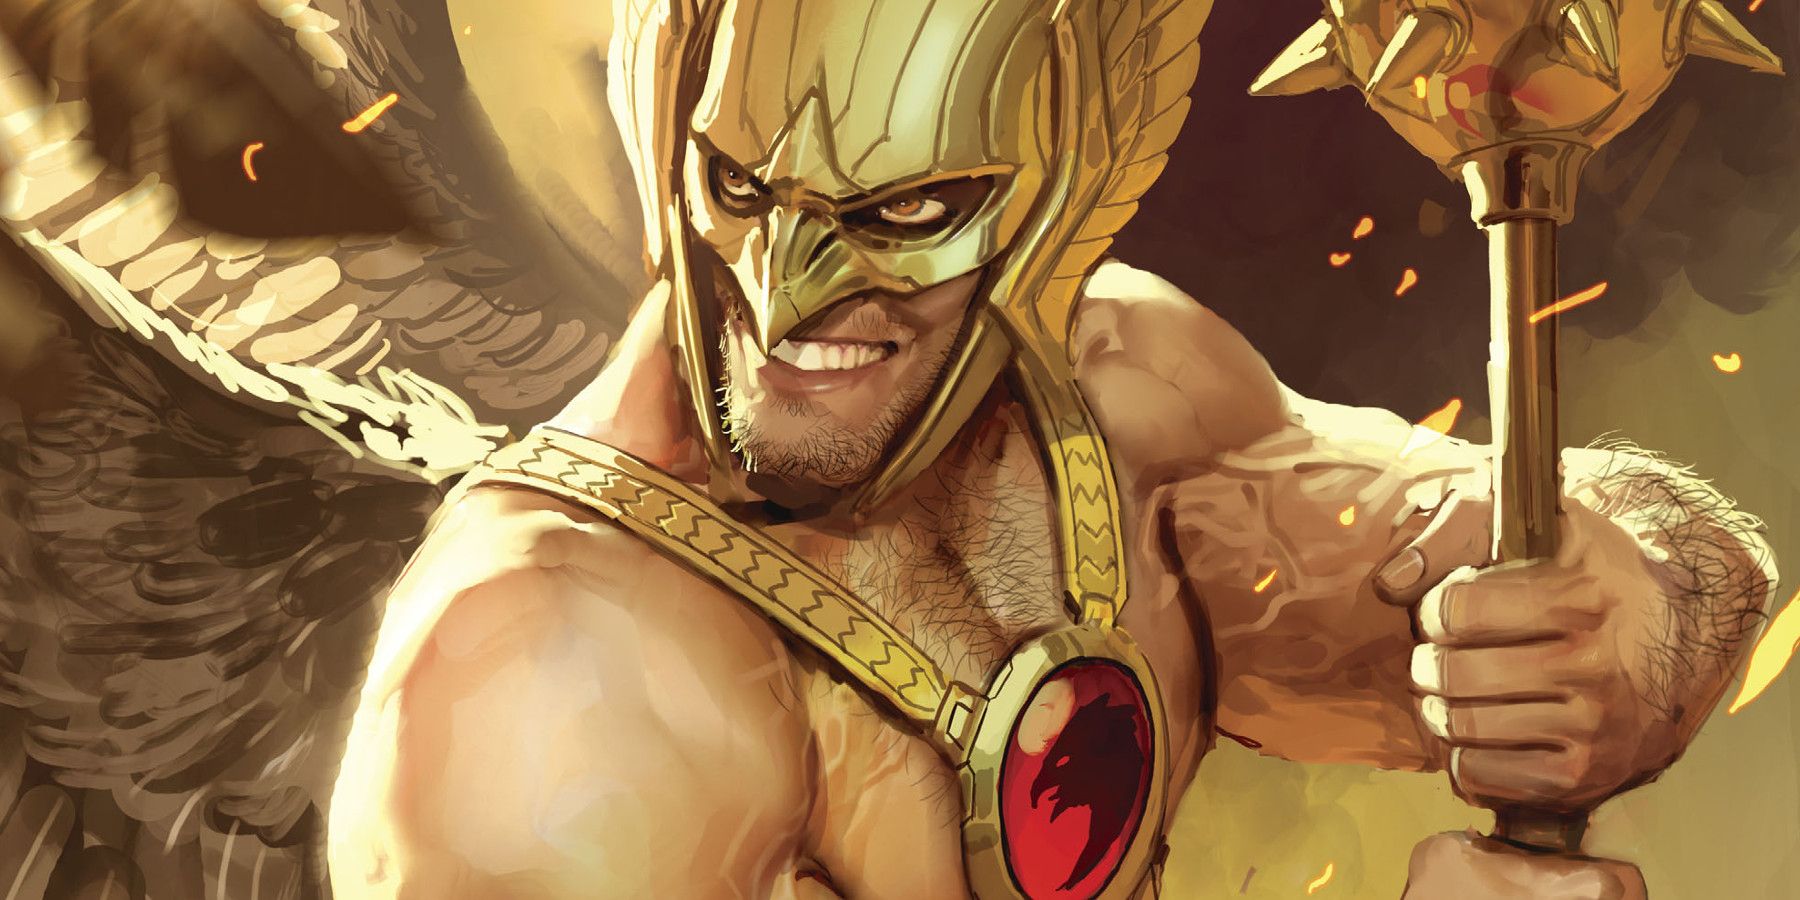 Hawkman #1 Variant Cover